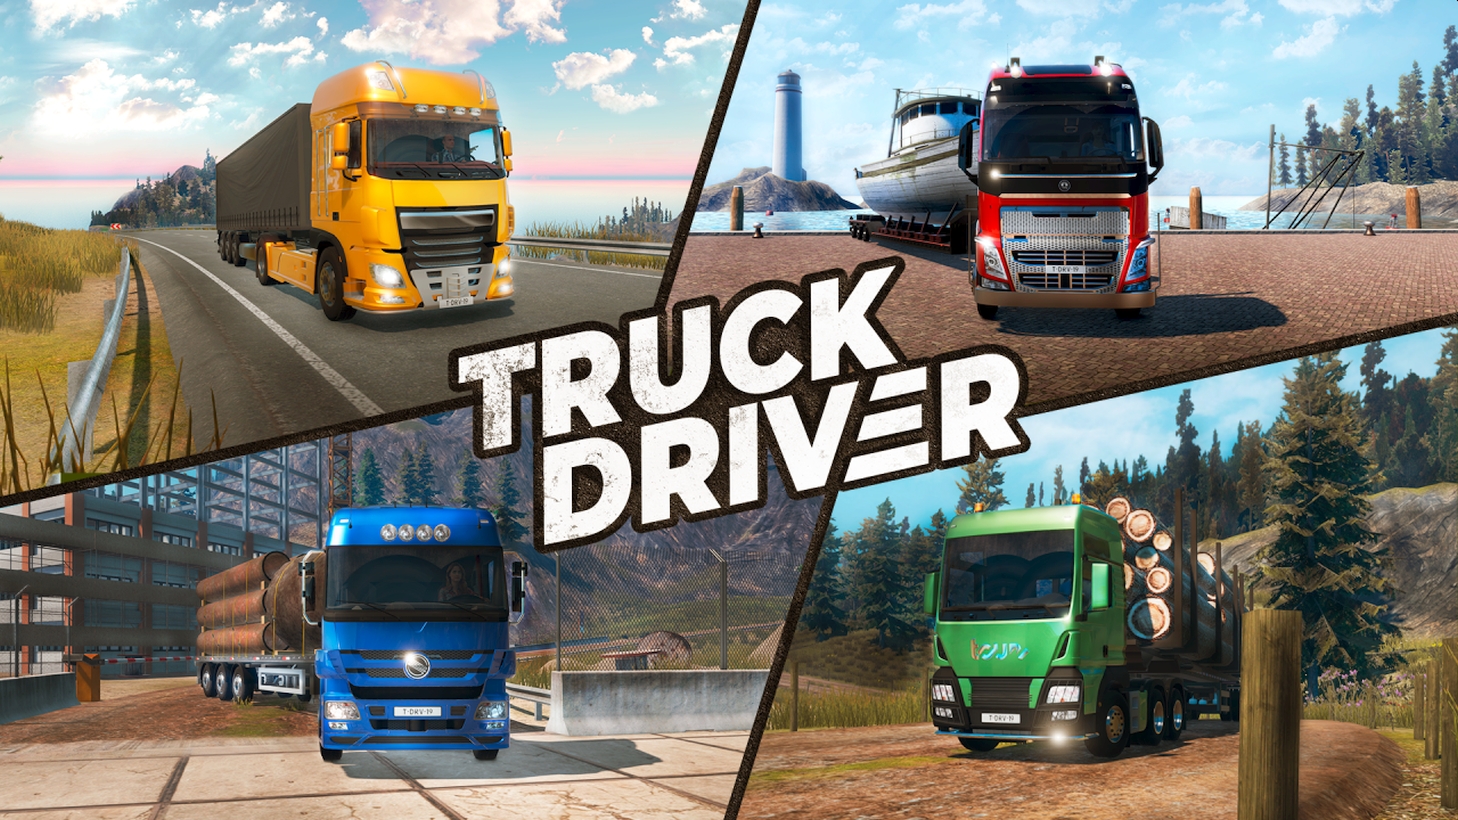 Truck Driver Updates With New Patch Just In Time For One-Year Anniversary